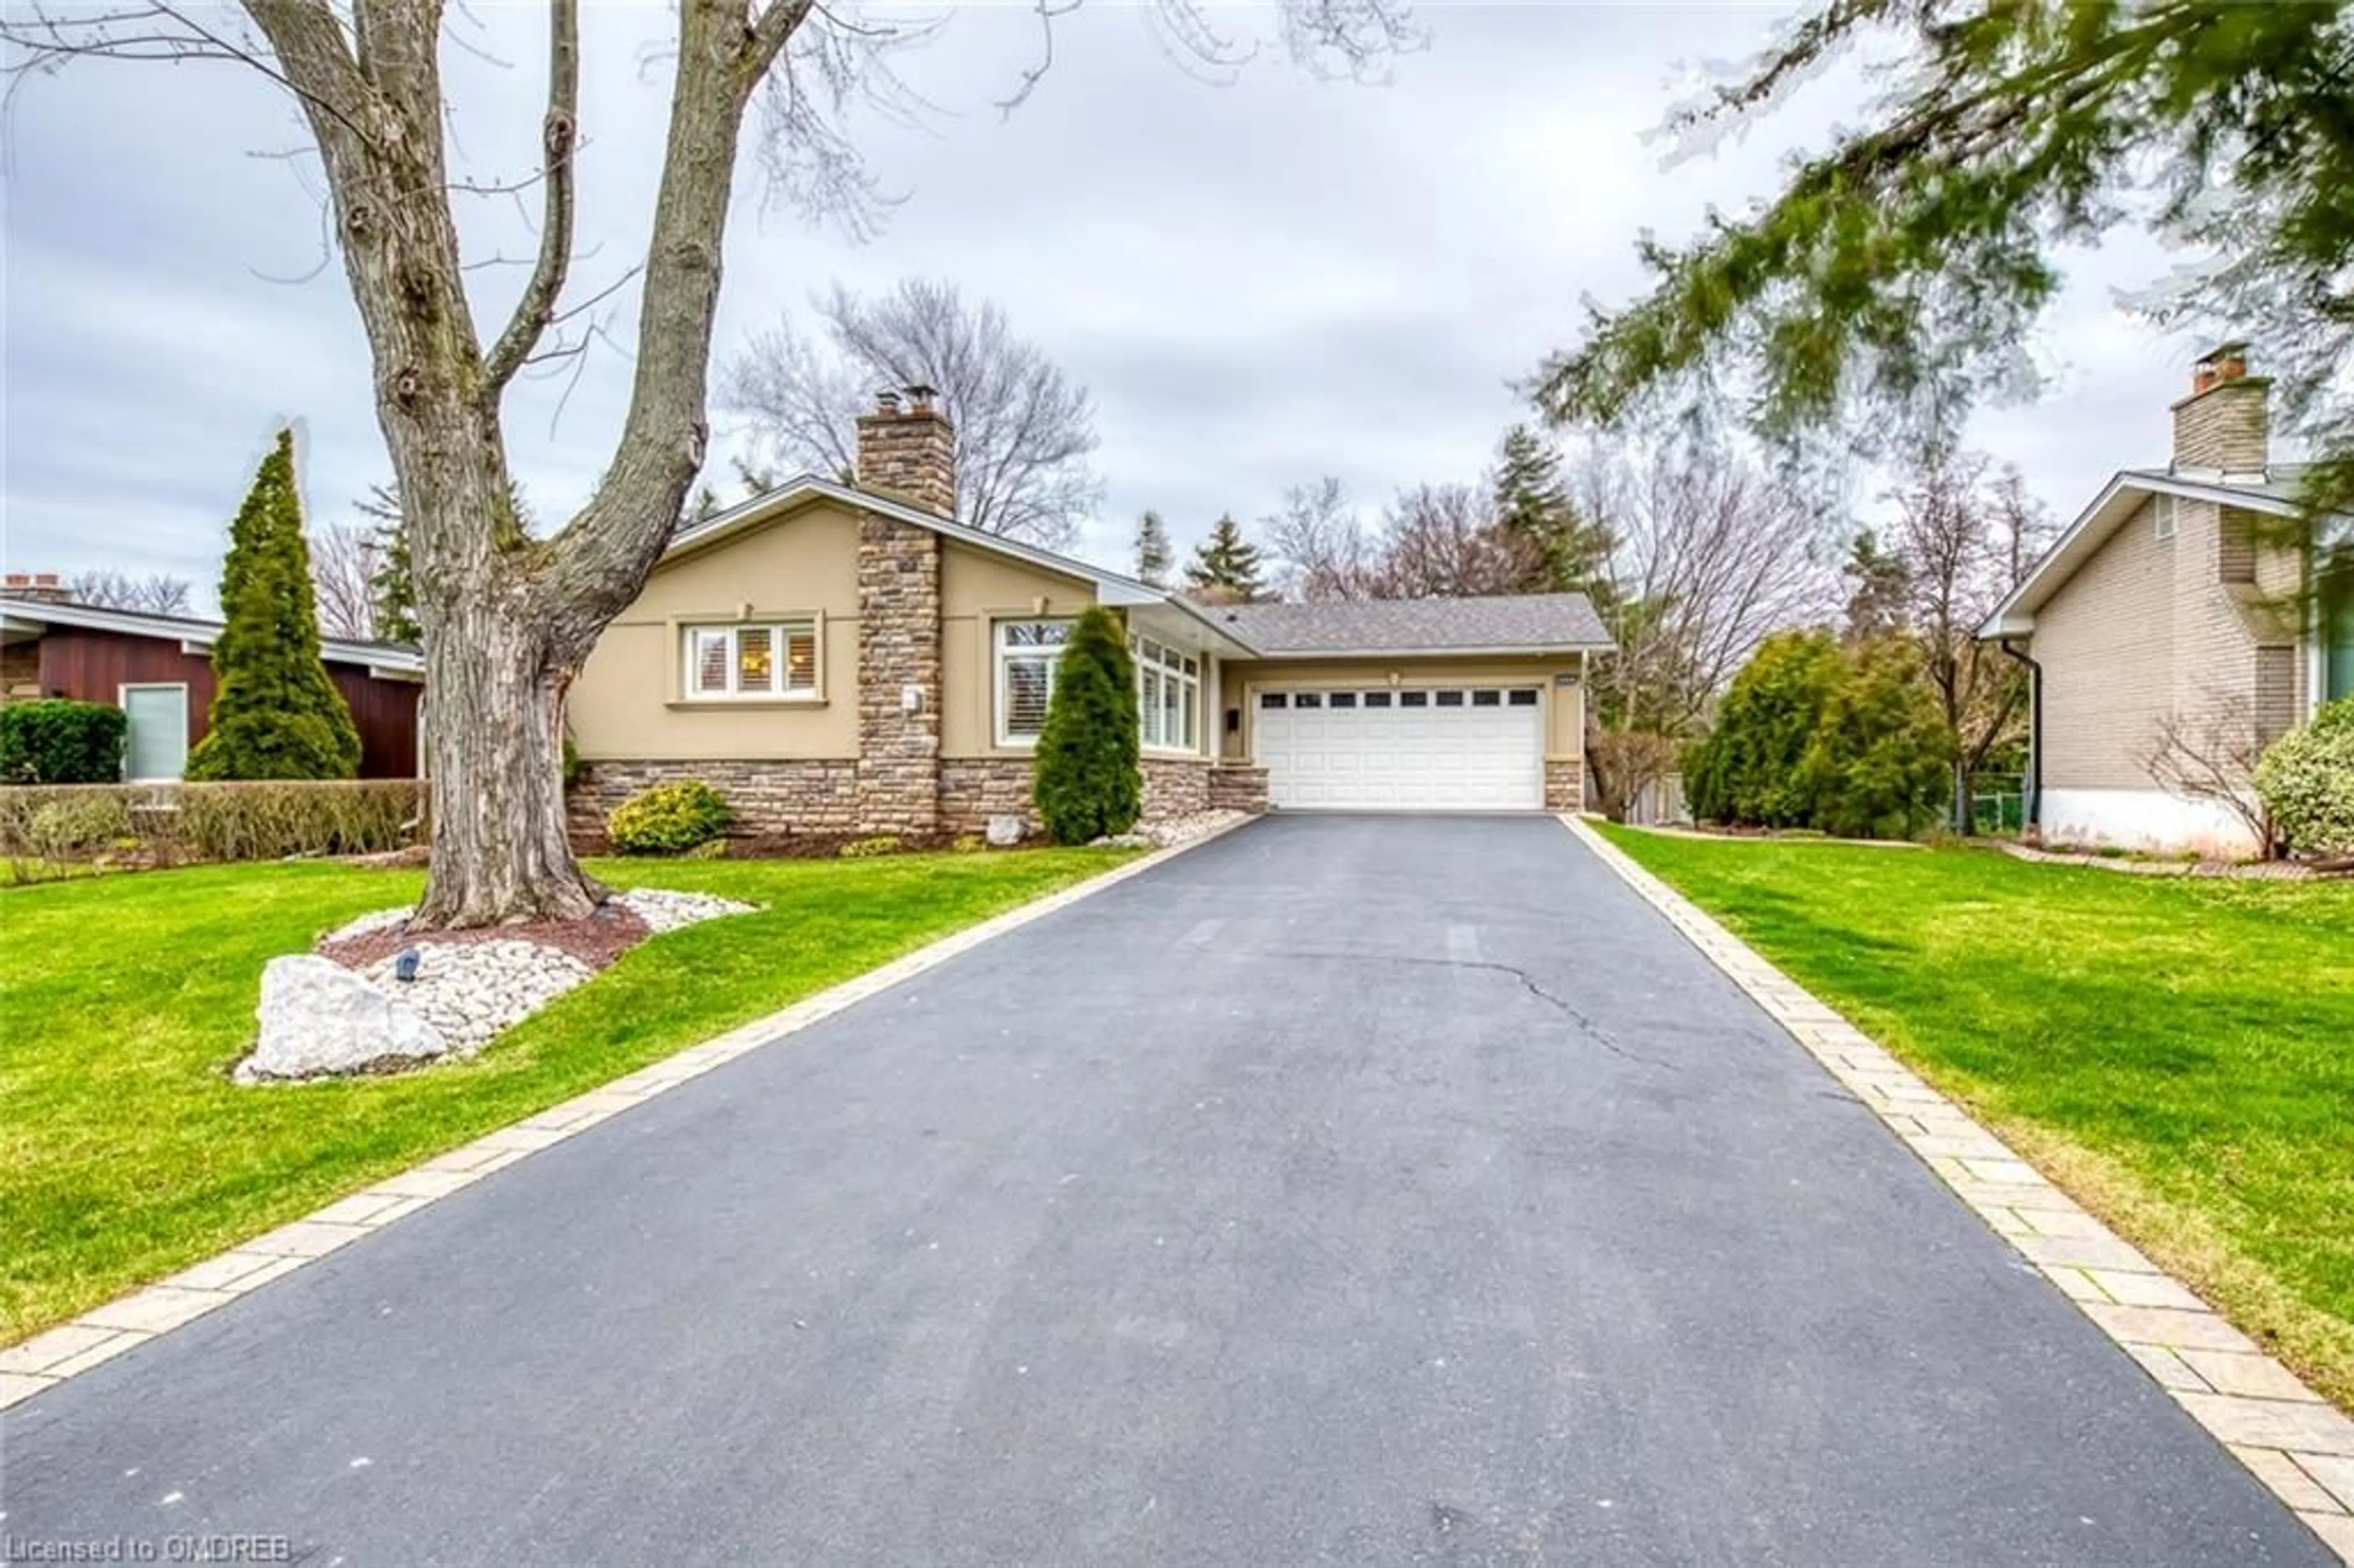 Street view for 1216 Holton Heights Dr, Oakville Ontario L6H 2E7